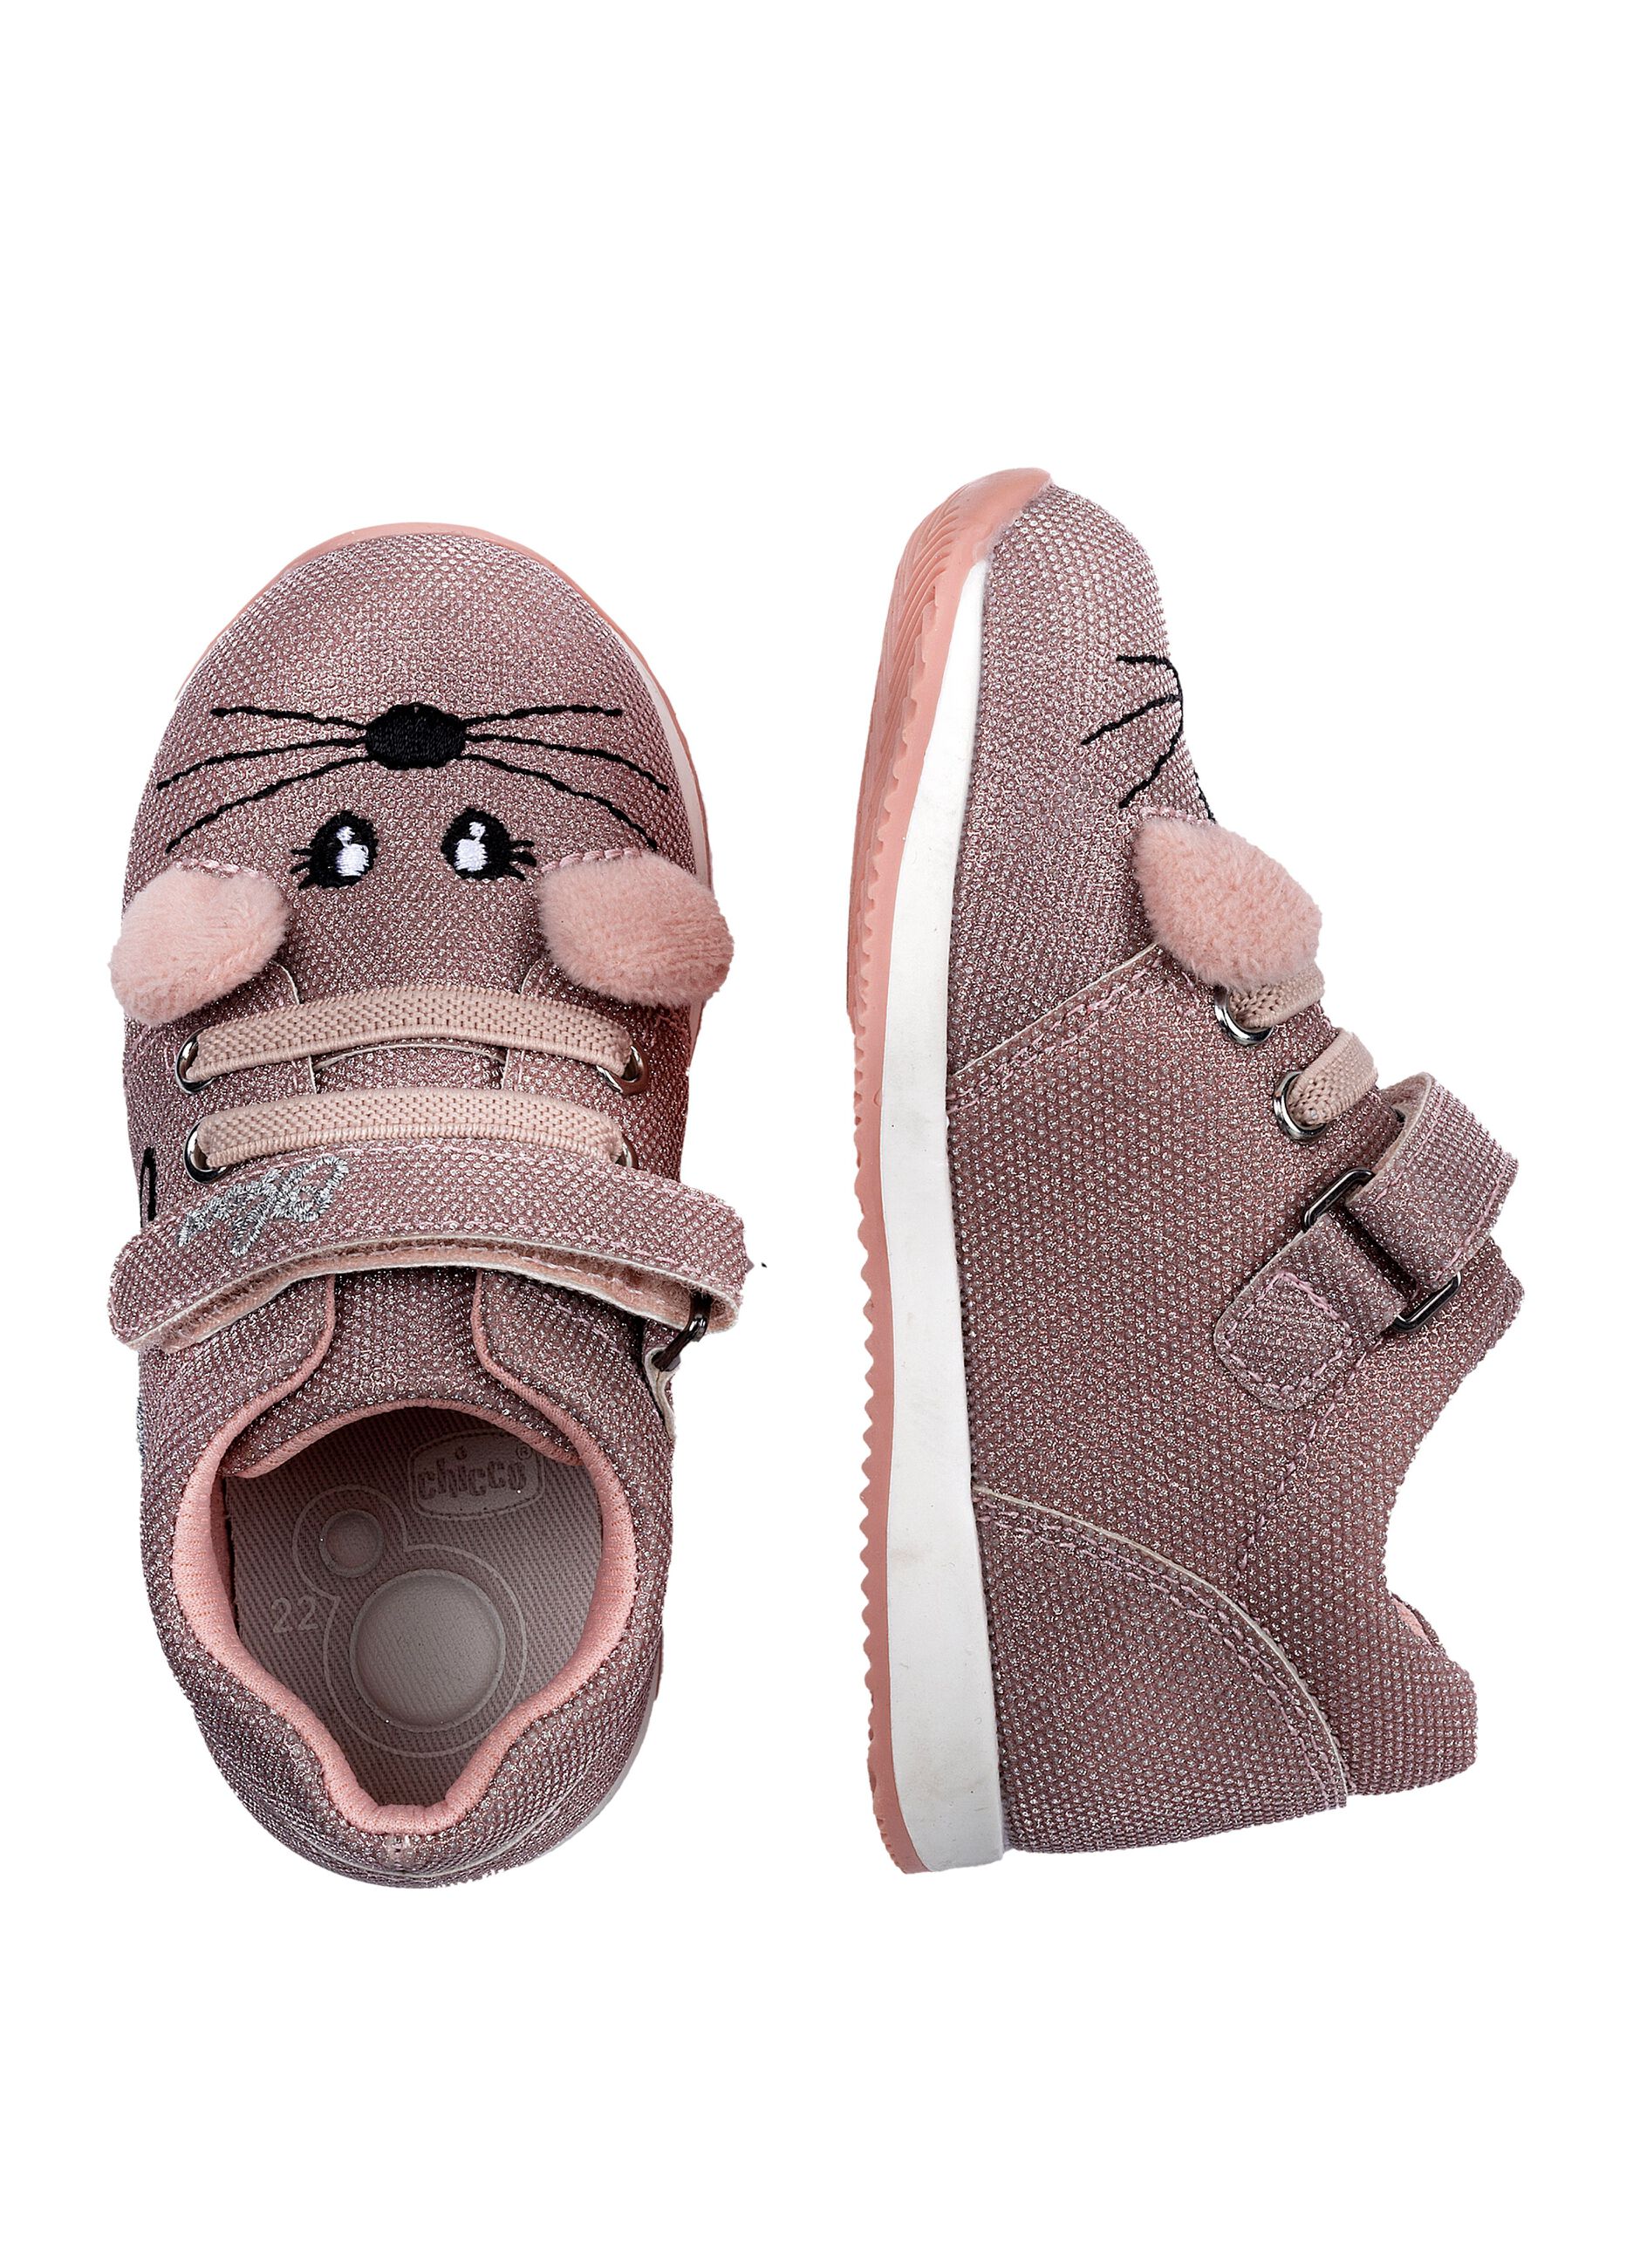 Chicco sneakers with girl mouse embroidery